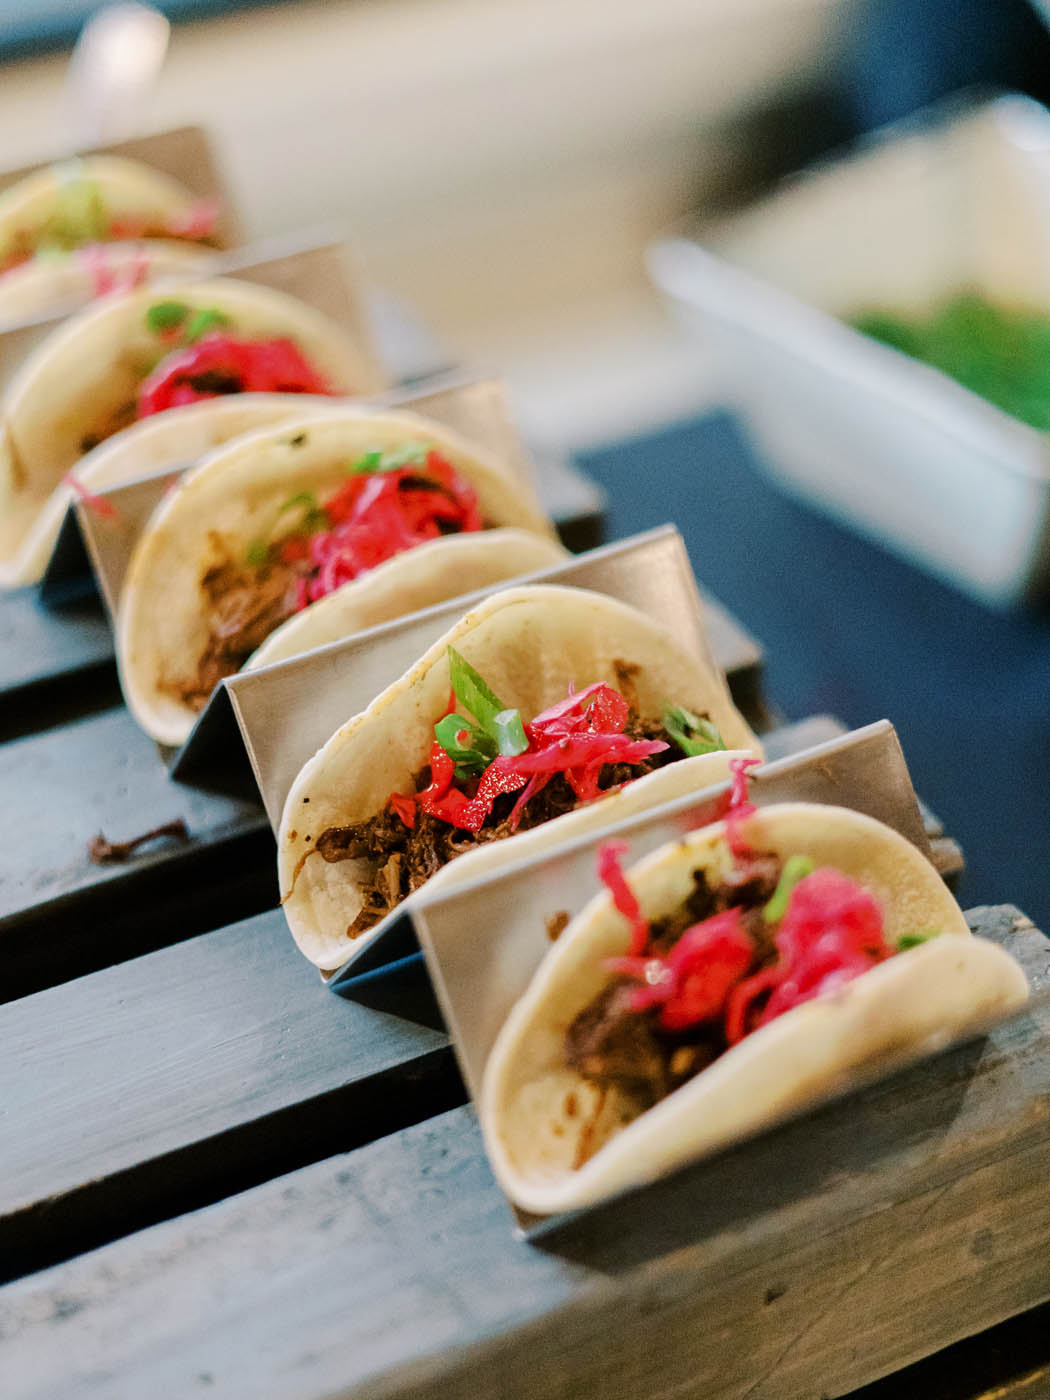 Mini tacos served to the guests